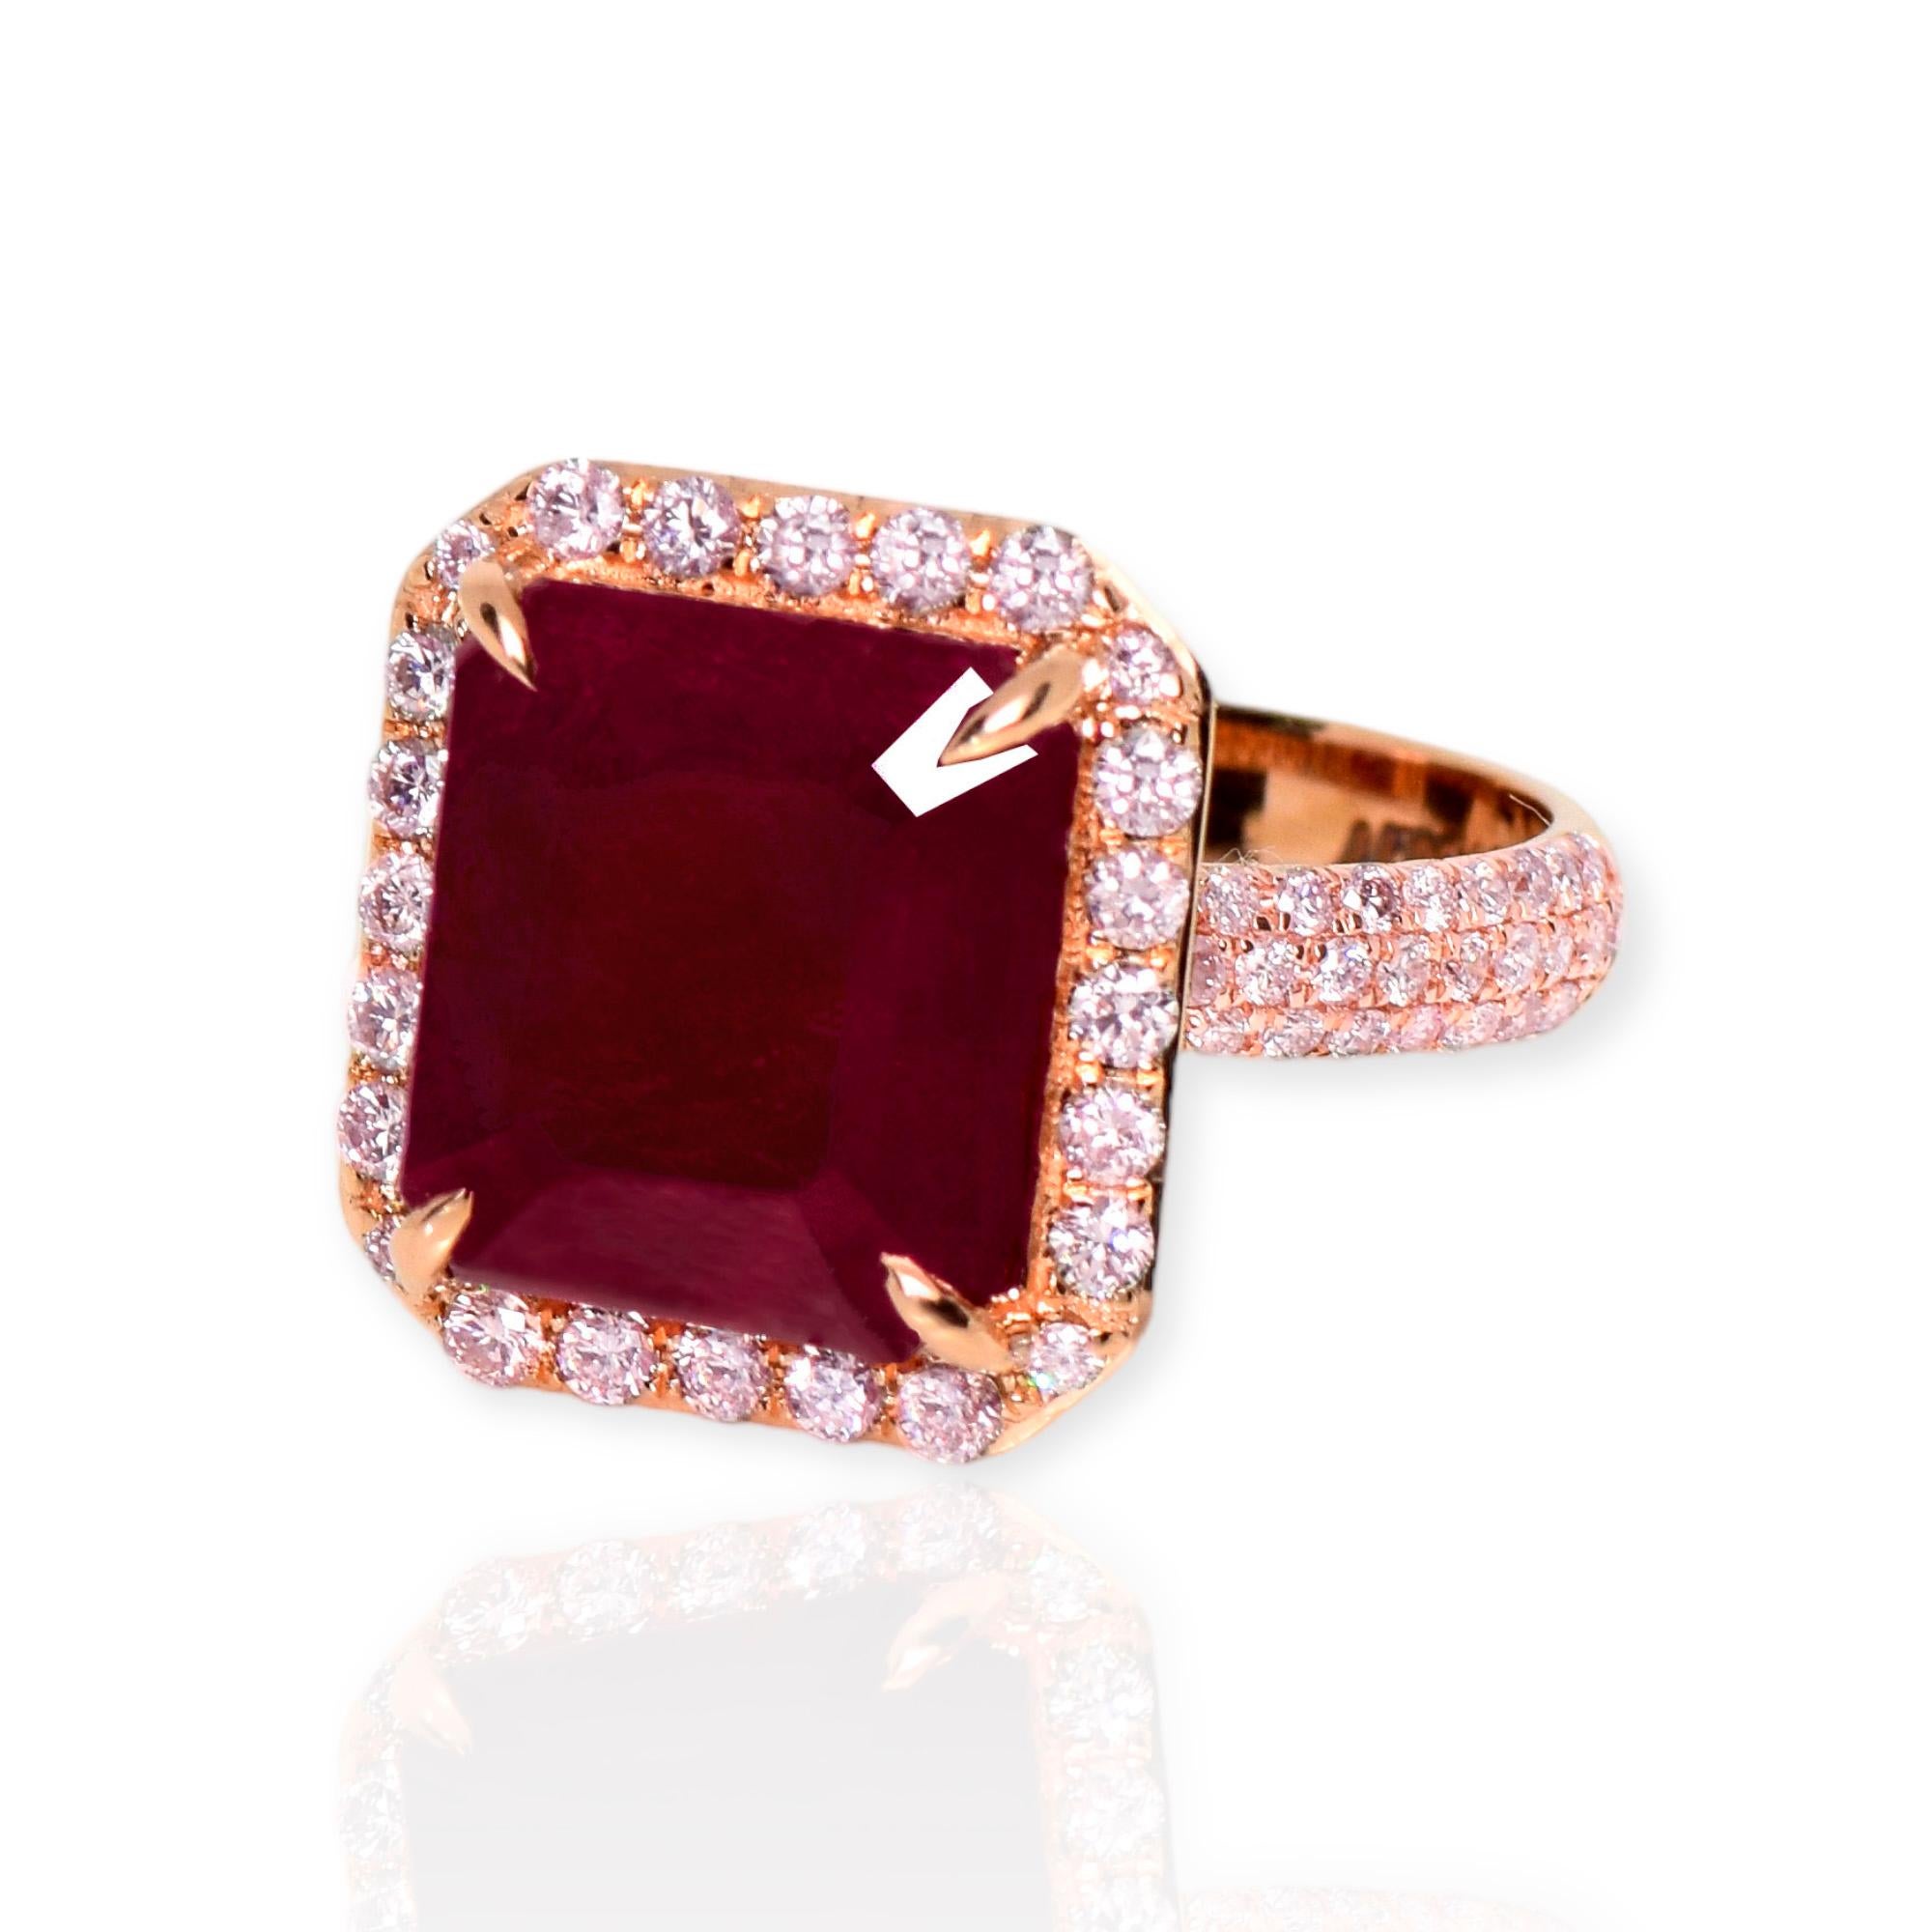 Emerald Cut IGI 14K 6.70 ct Natural Unheated Red Ruby&Pink Diamonds Engagement Ring For Sale